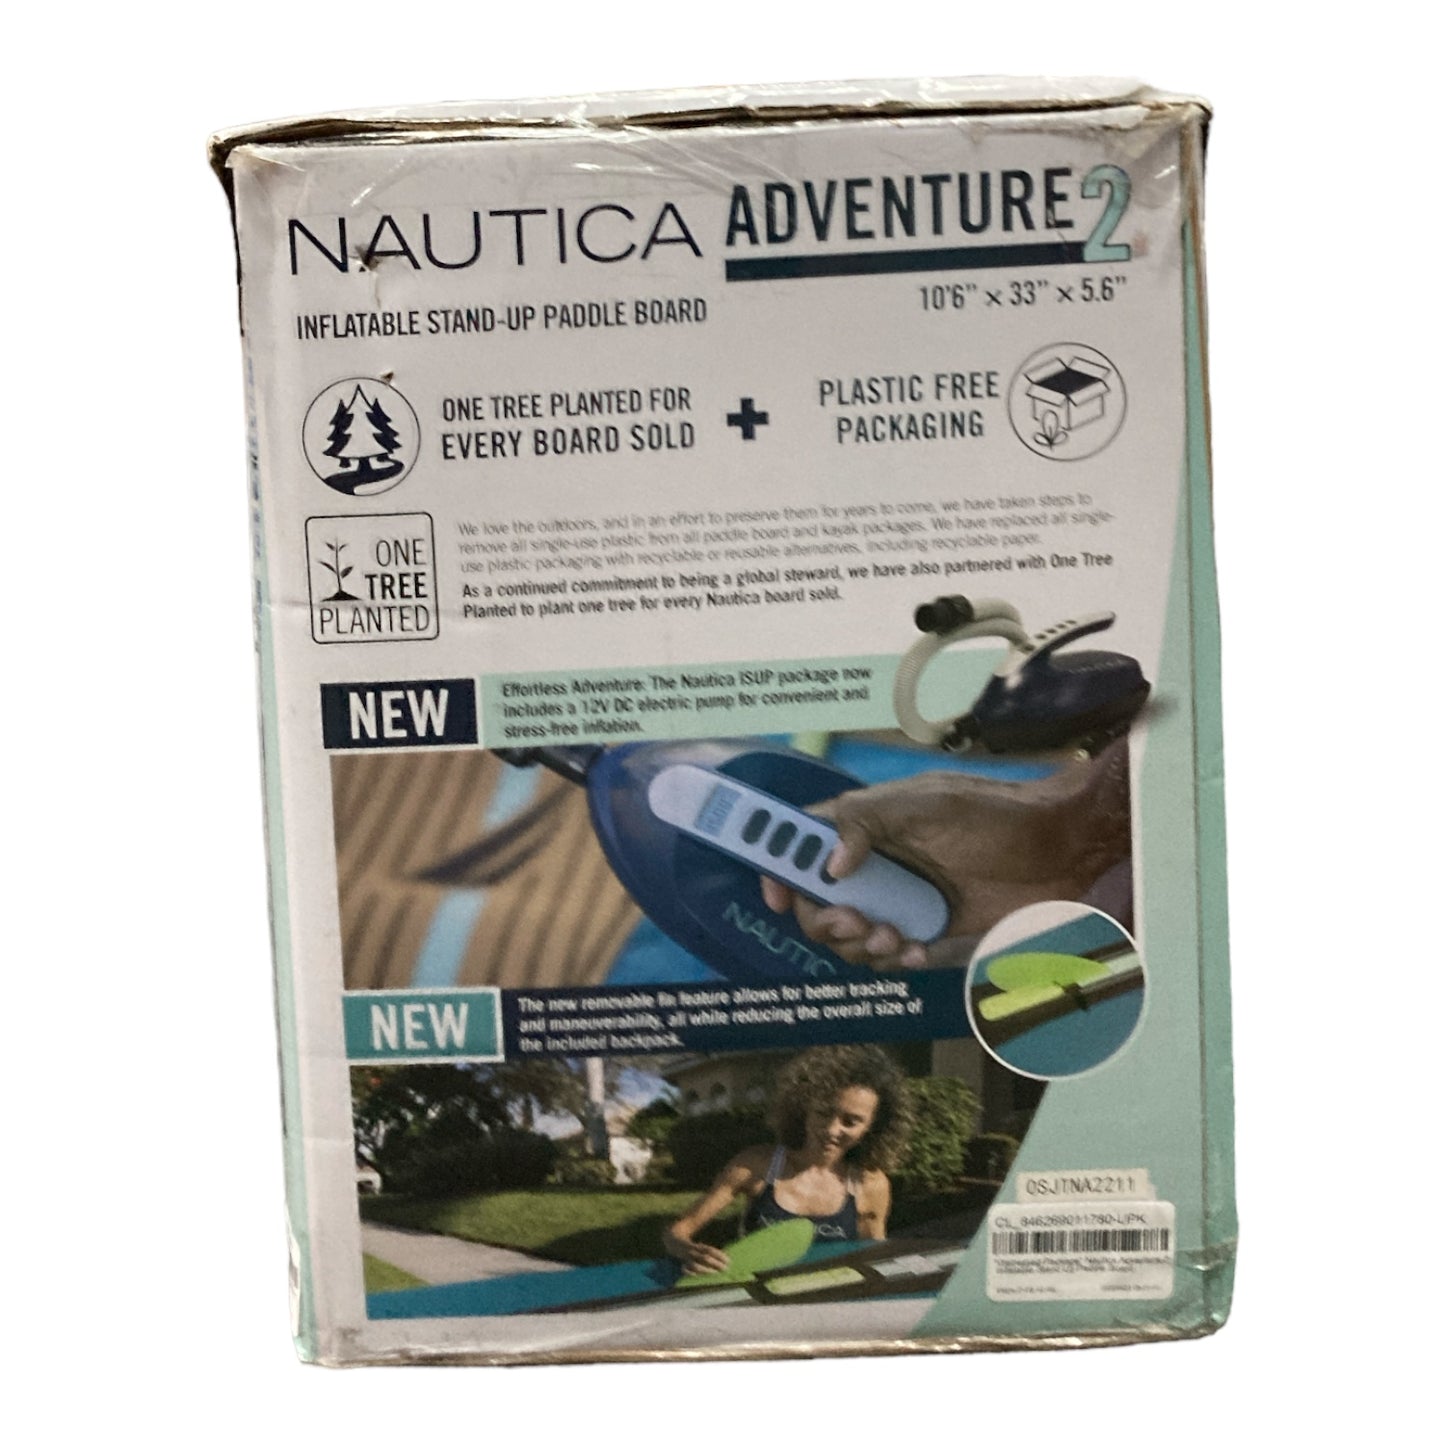 *Distressed Package* Nautica Adventure 2 Inflatable Stand Up Paddle Board